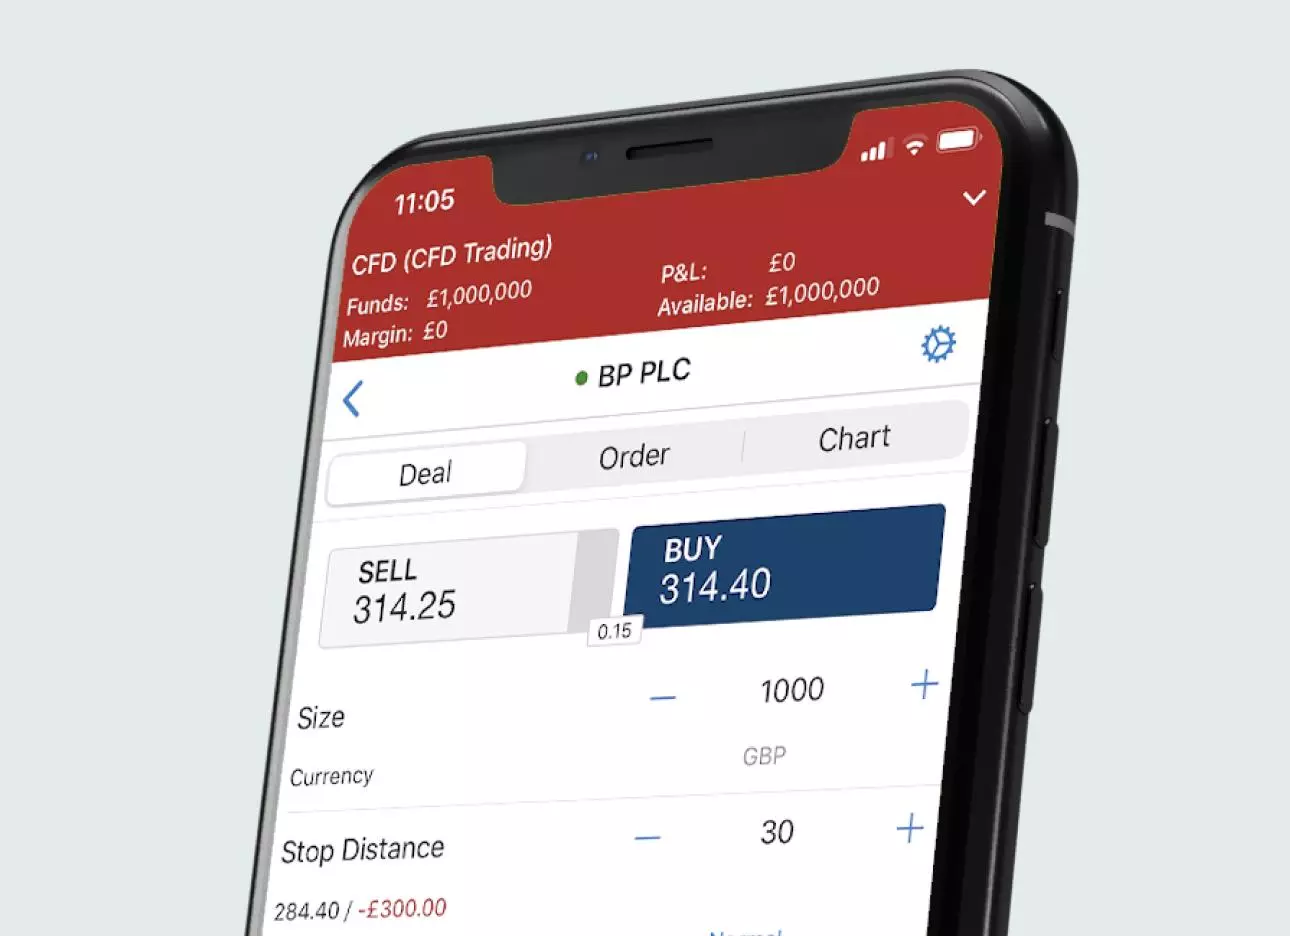 Phone showing CFD trading with deal, order and chart options on the app